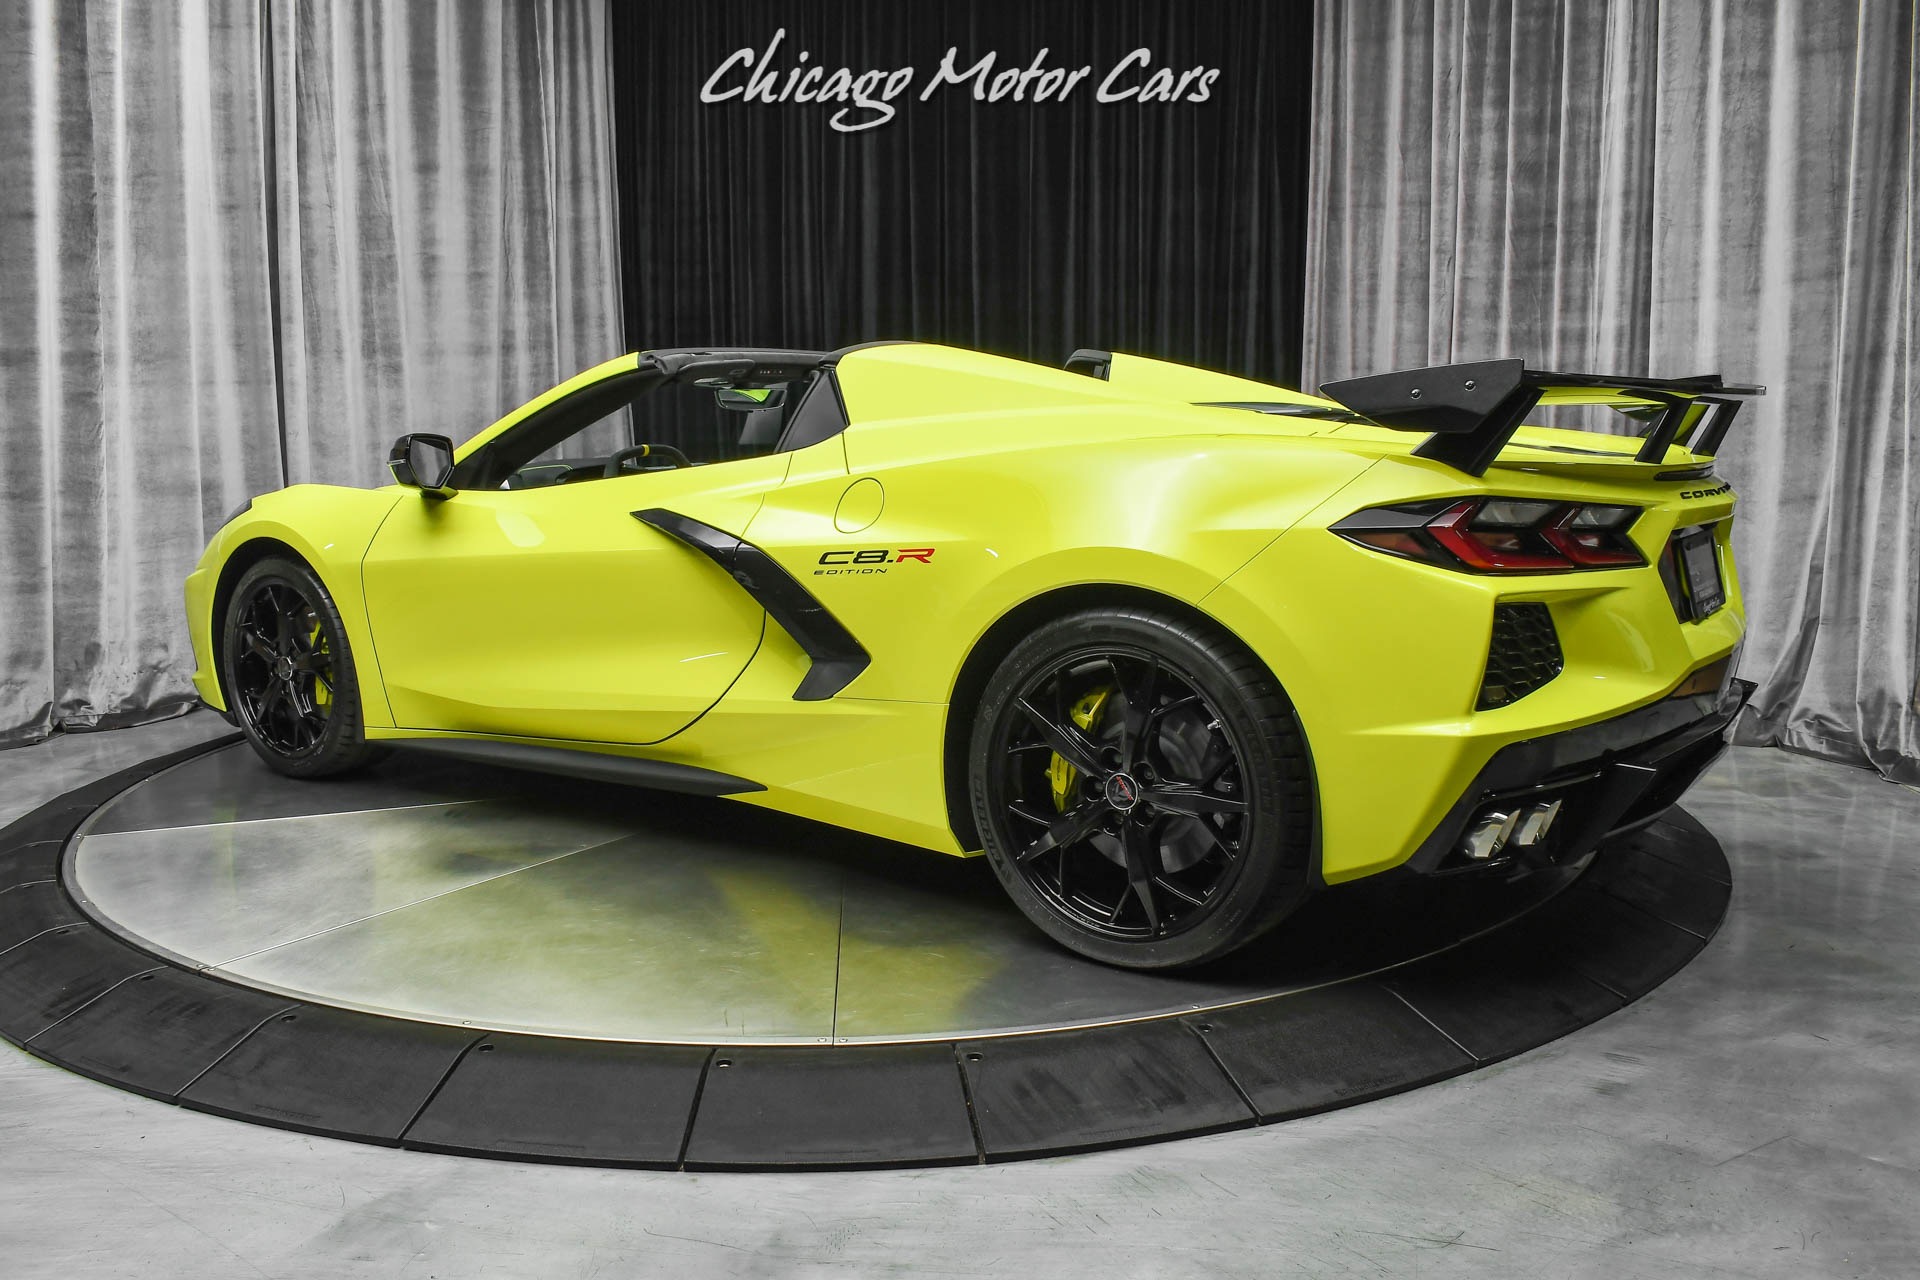 Used-2022-Chevrolet-Corvette-Stingray-C8R-3LT-Convertible-with-Z51-ONLY-4-Miles-LOADED-RARE